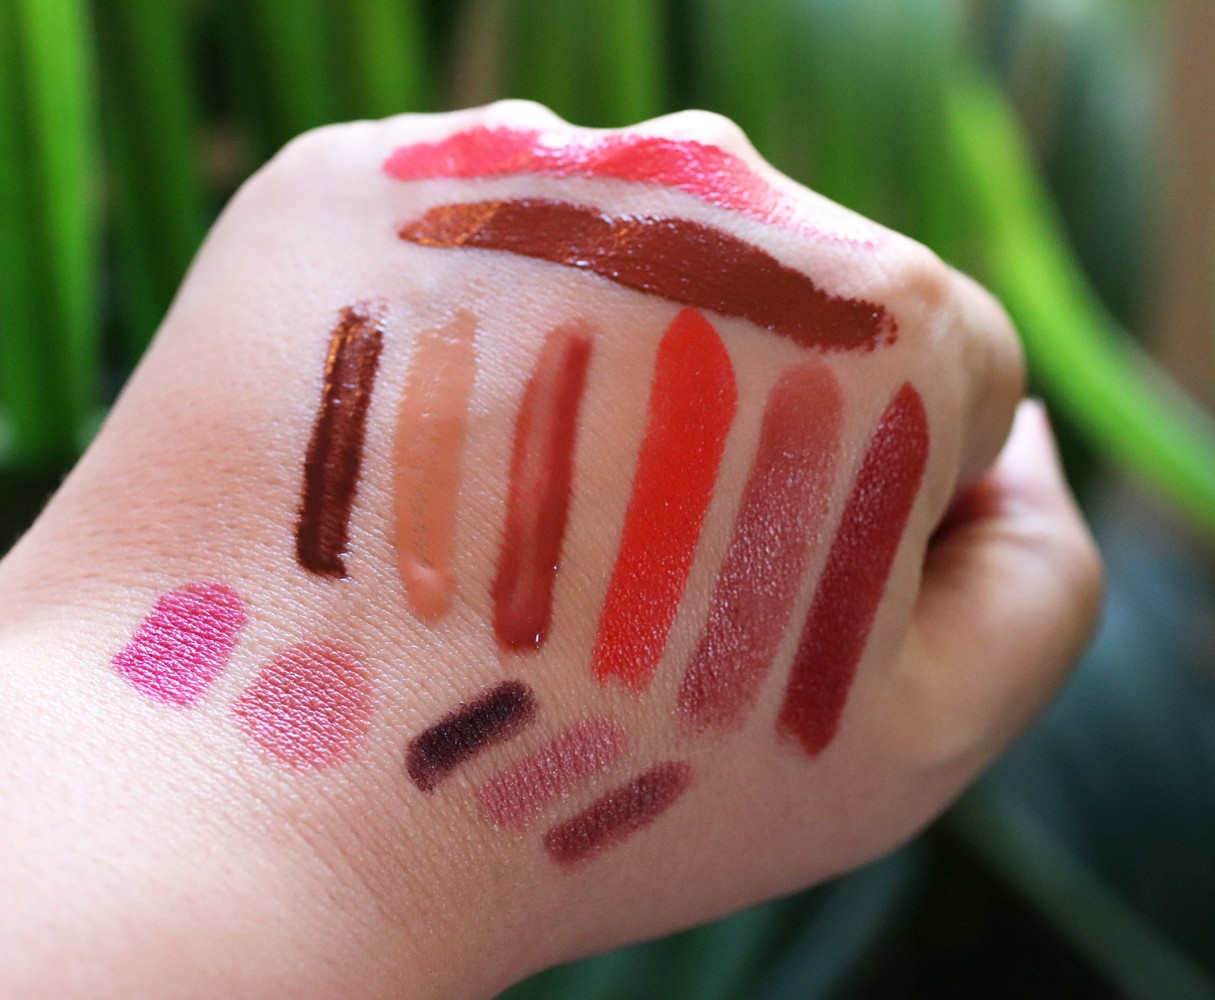 Bite Beauty Lipstick Swatches - Create Your Own Cruelty Free Lipstick at Lip Lab By BITE | Sharing a Review and Experience featured by popular Los Angeles cruelty free beauty blogger My Beauty Bunny